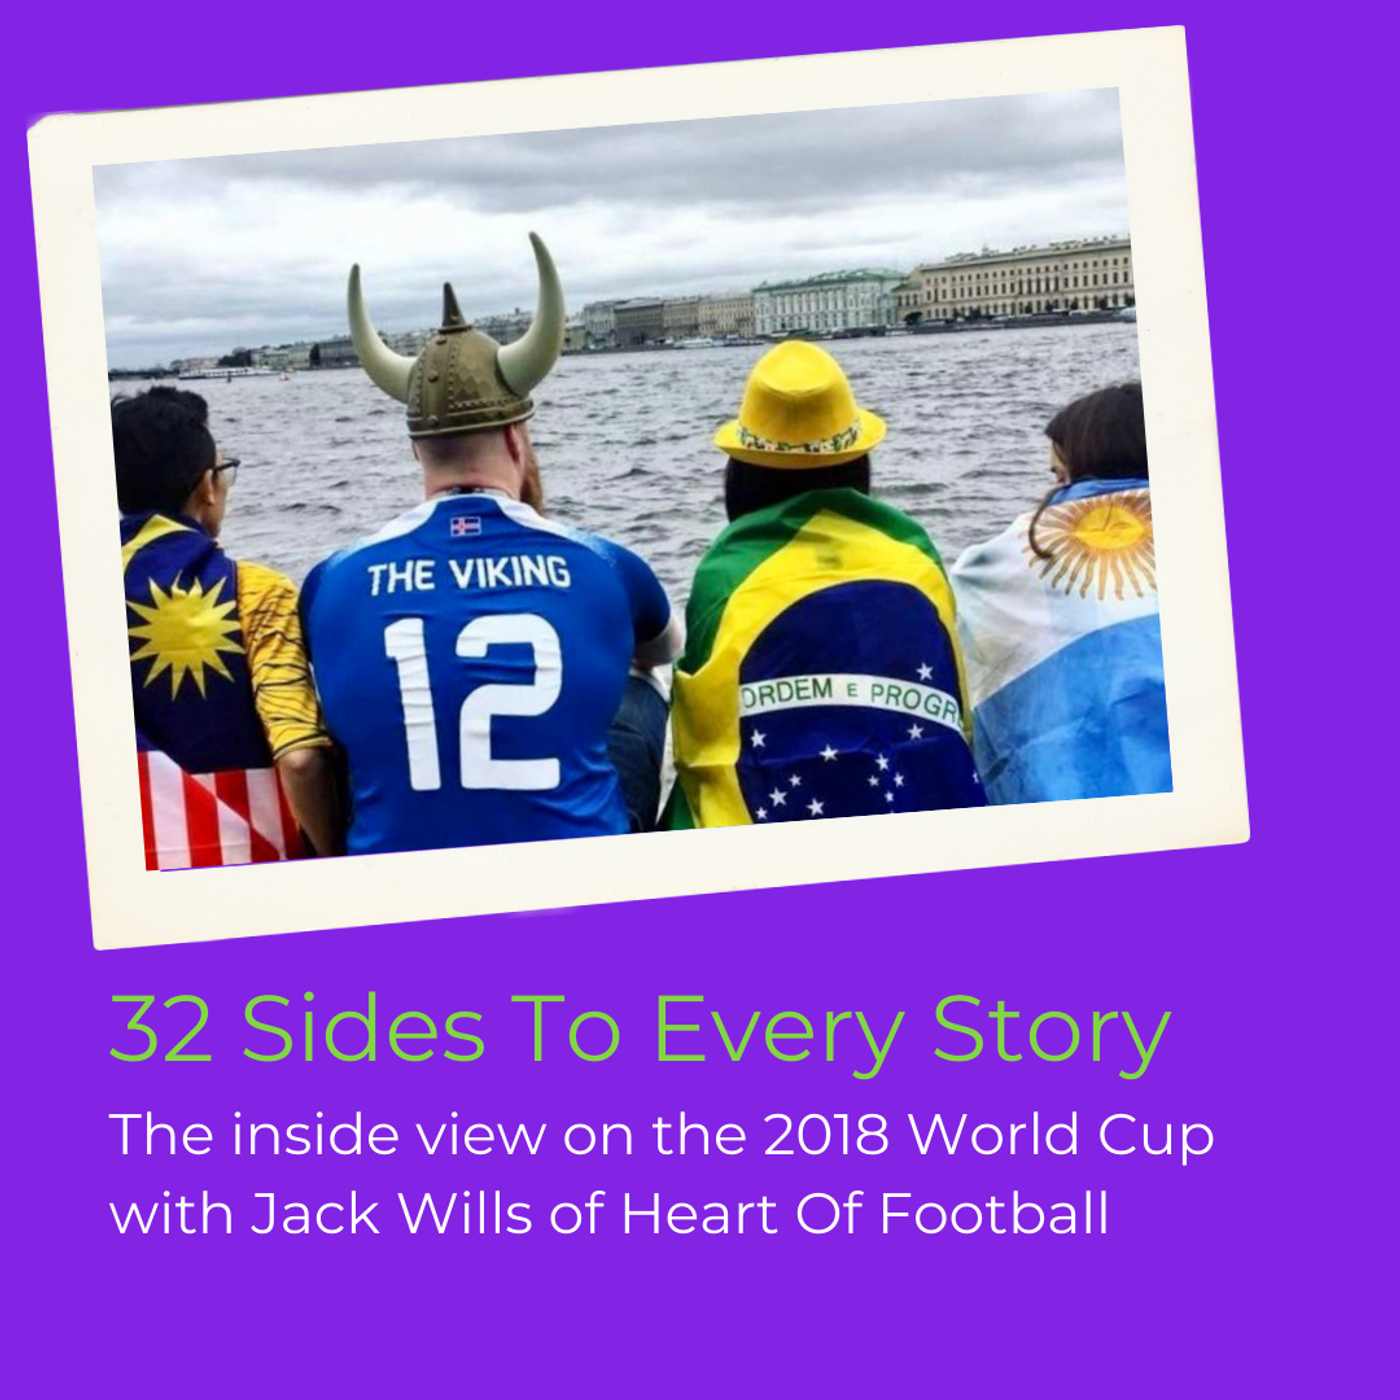 18: 32 sides, 32 stories from the 2018 World Cup in Russia with Jack Wills of Heart Of Football